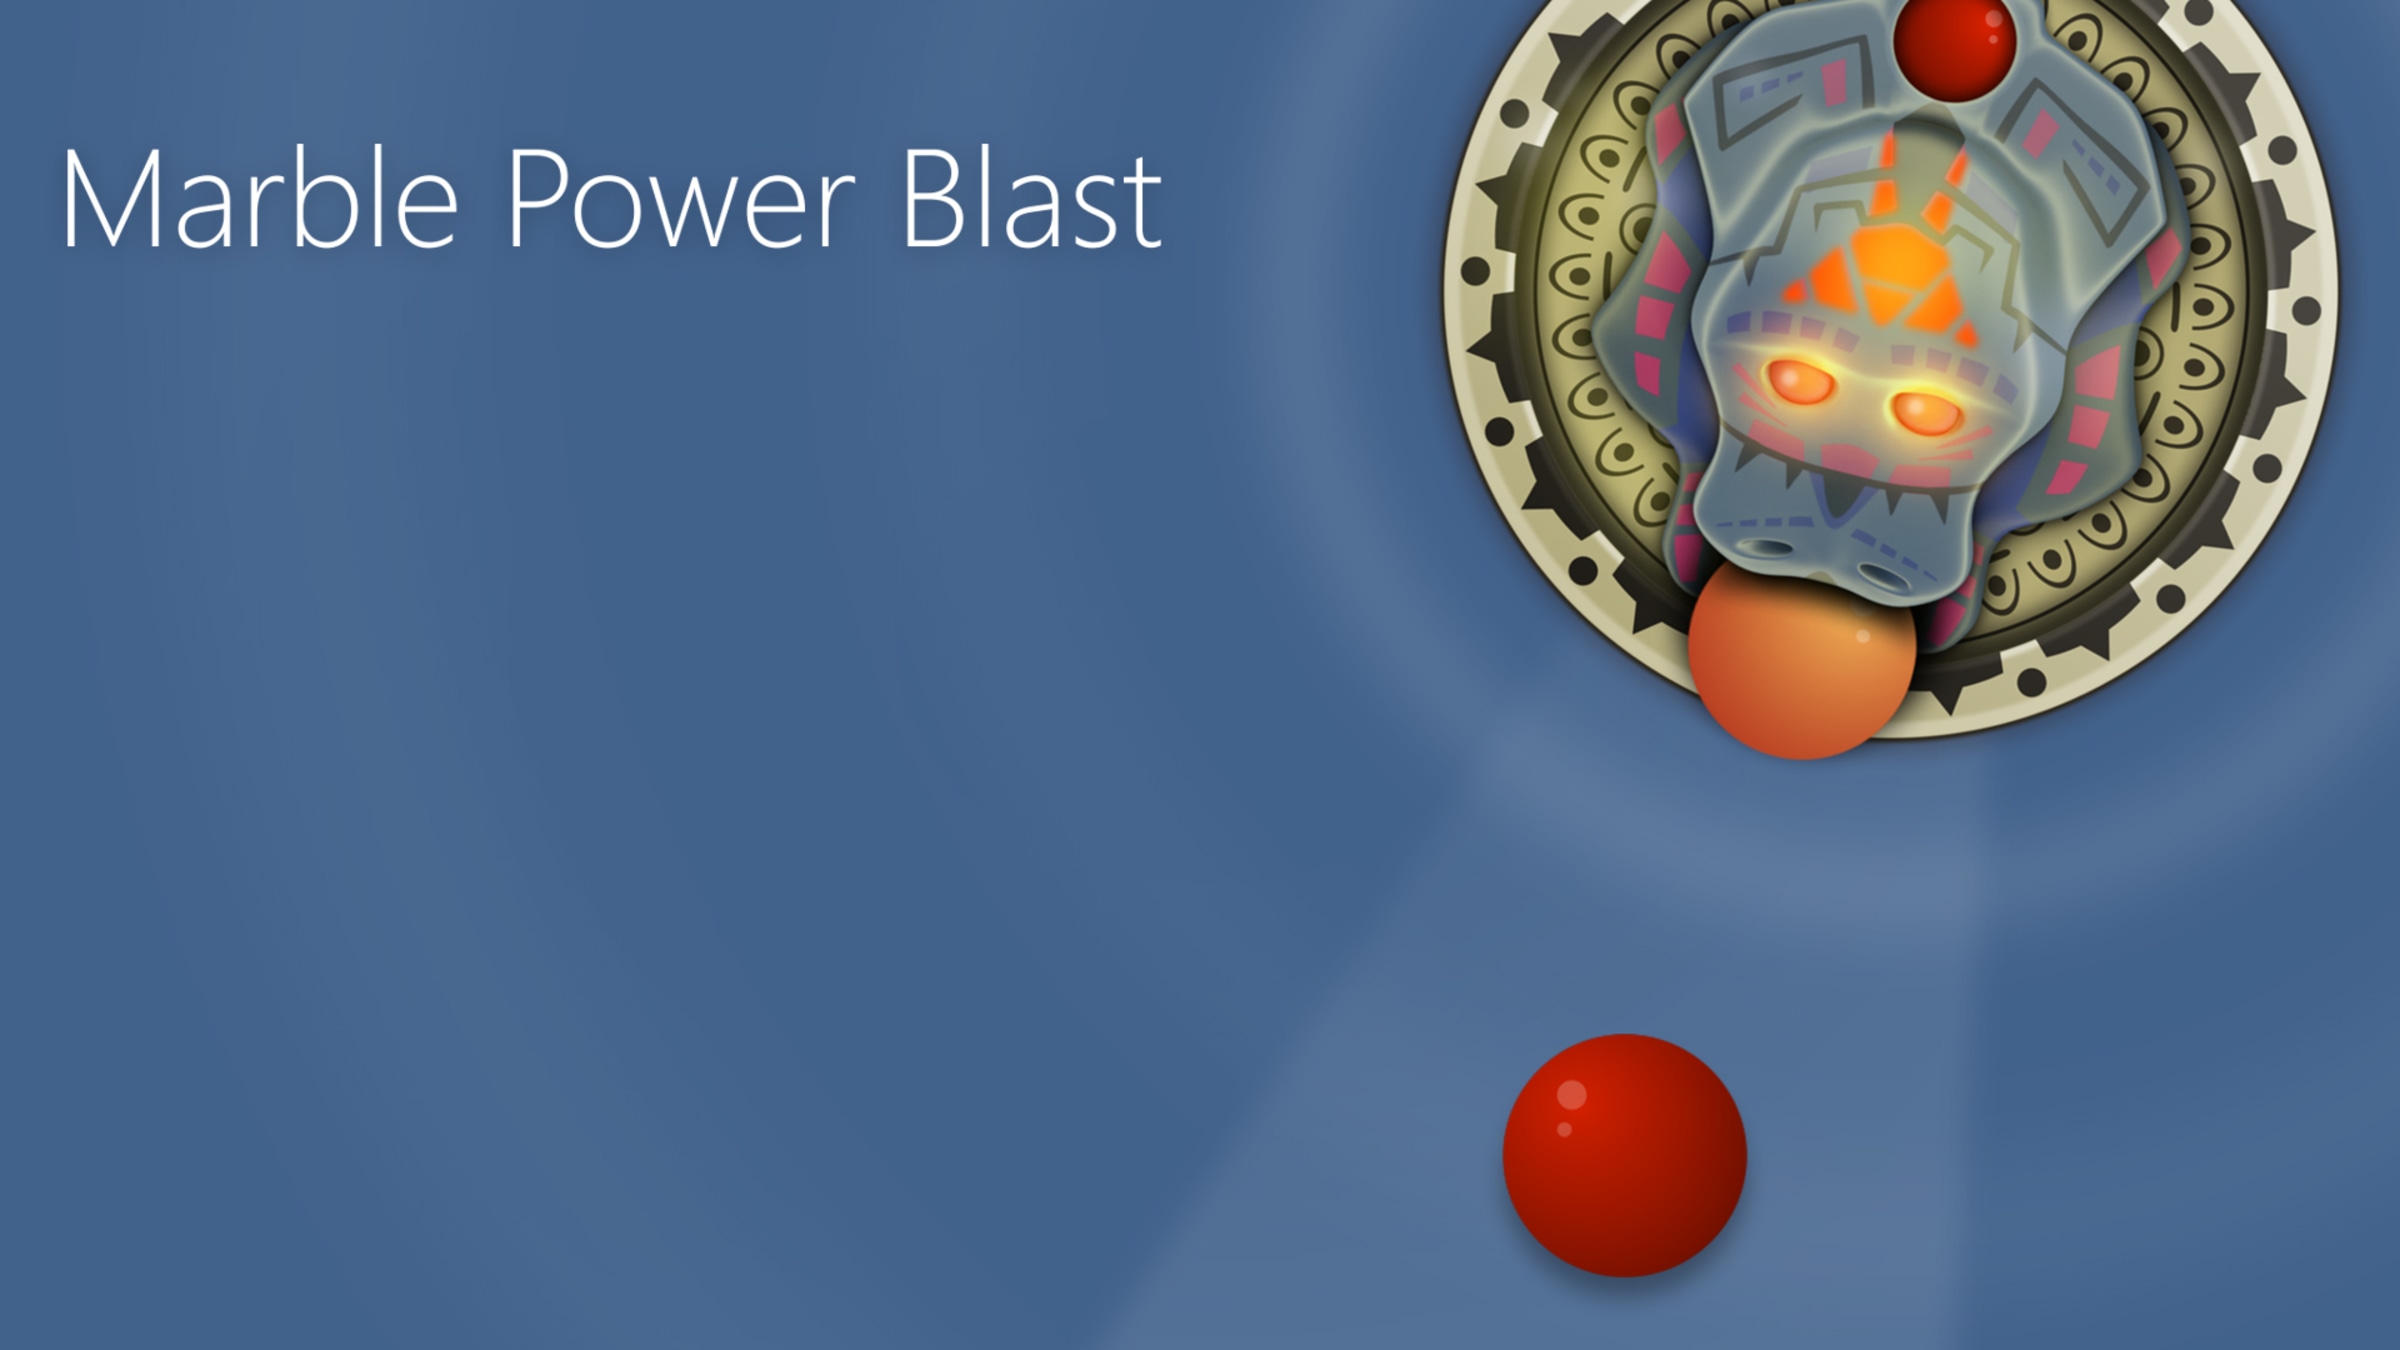 Marble Power Blast for Nintendo Switch